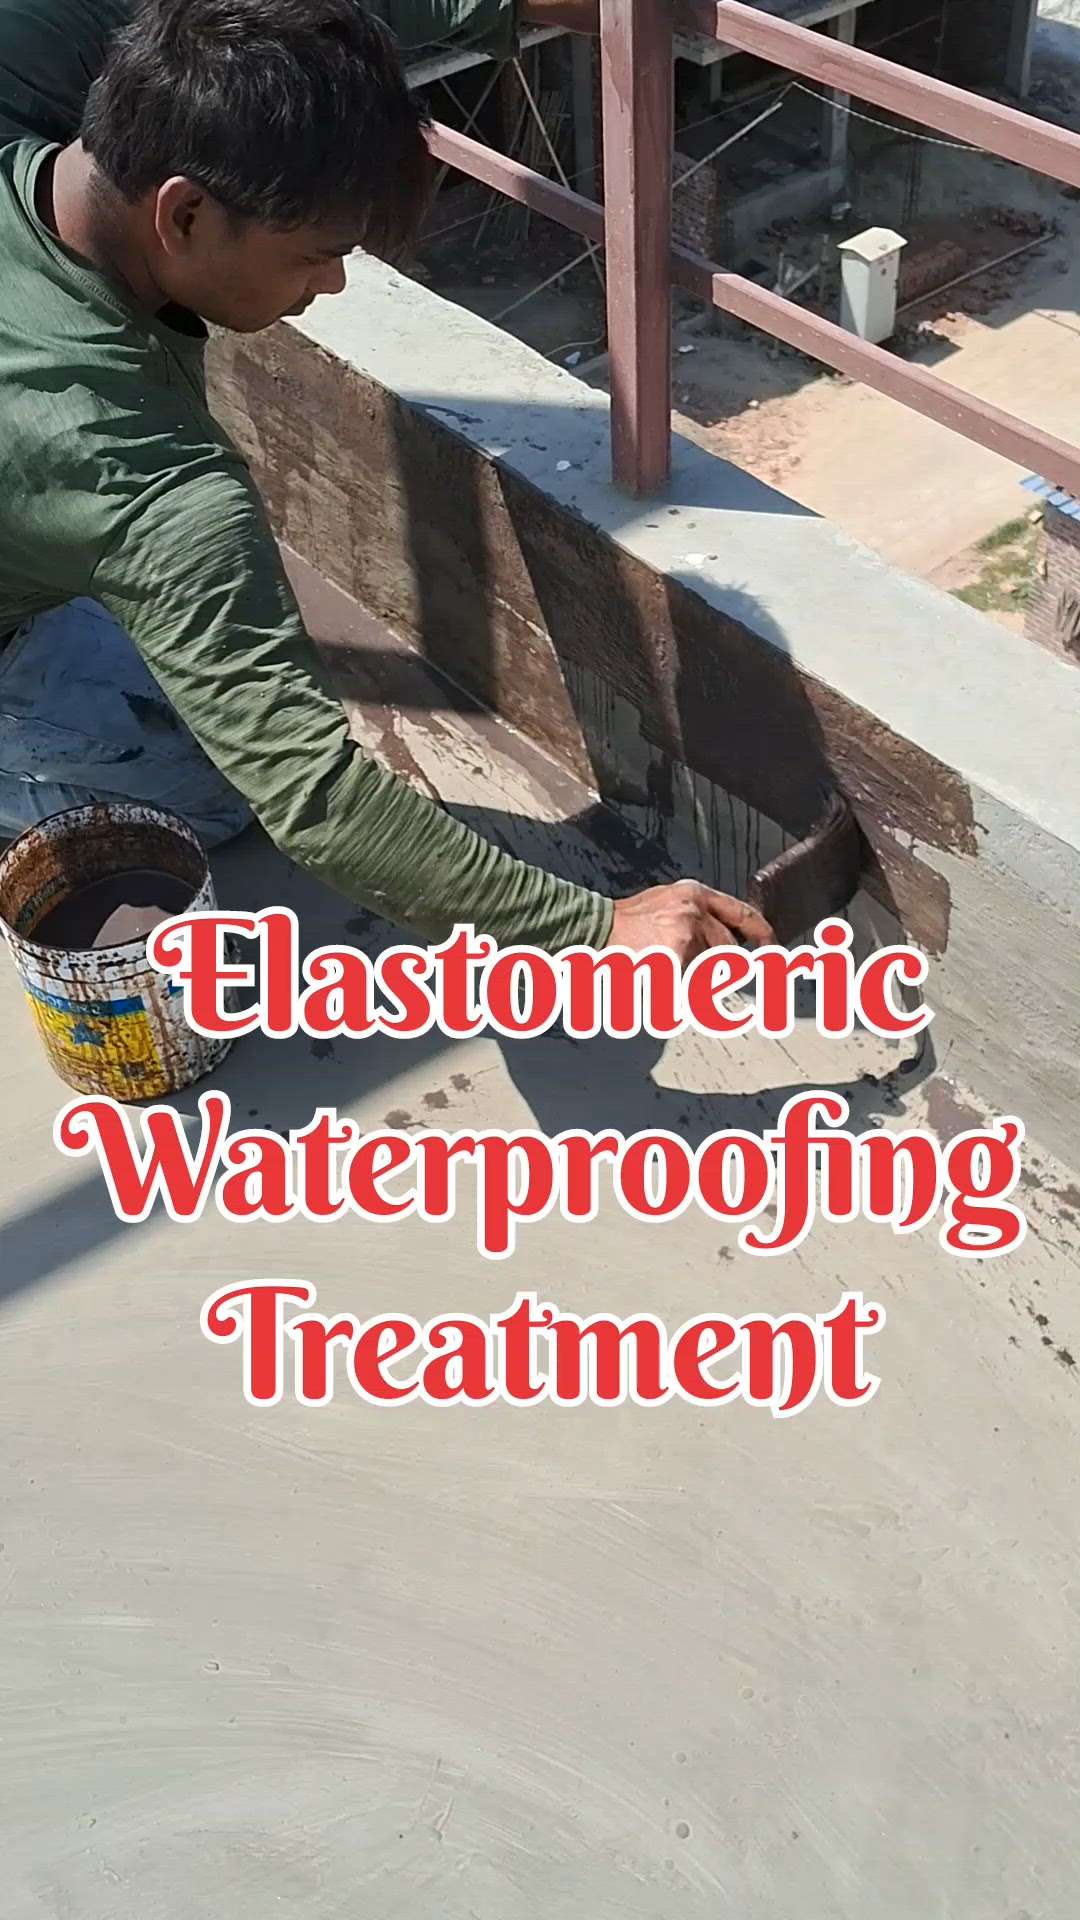 #waterproofing #roofwaterproofing #water #leakage #solution #problems #labourcost #waterproofingtreatment #construction 
#satisfying #reels #coolhome #coolhouse